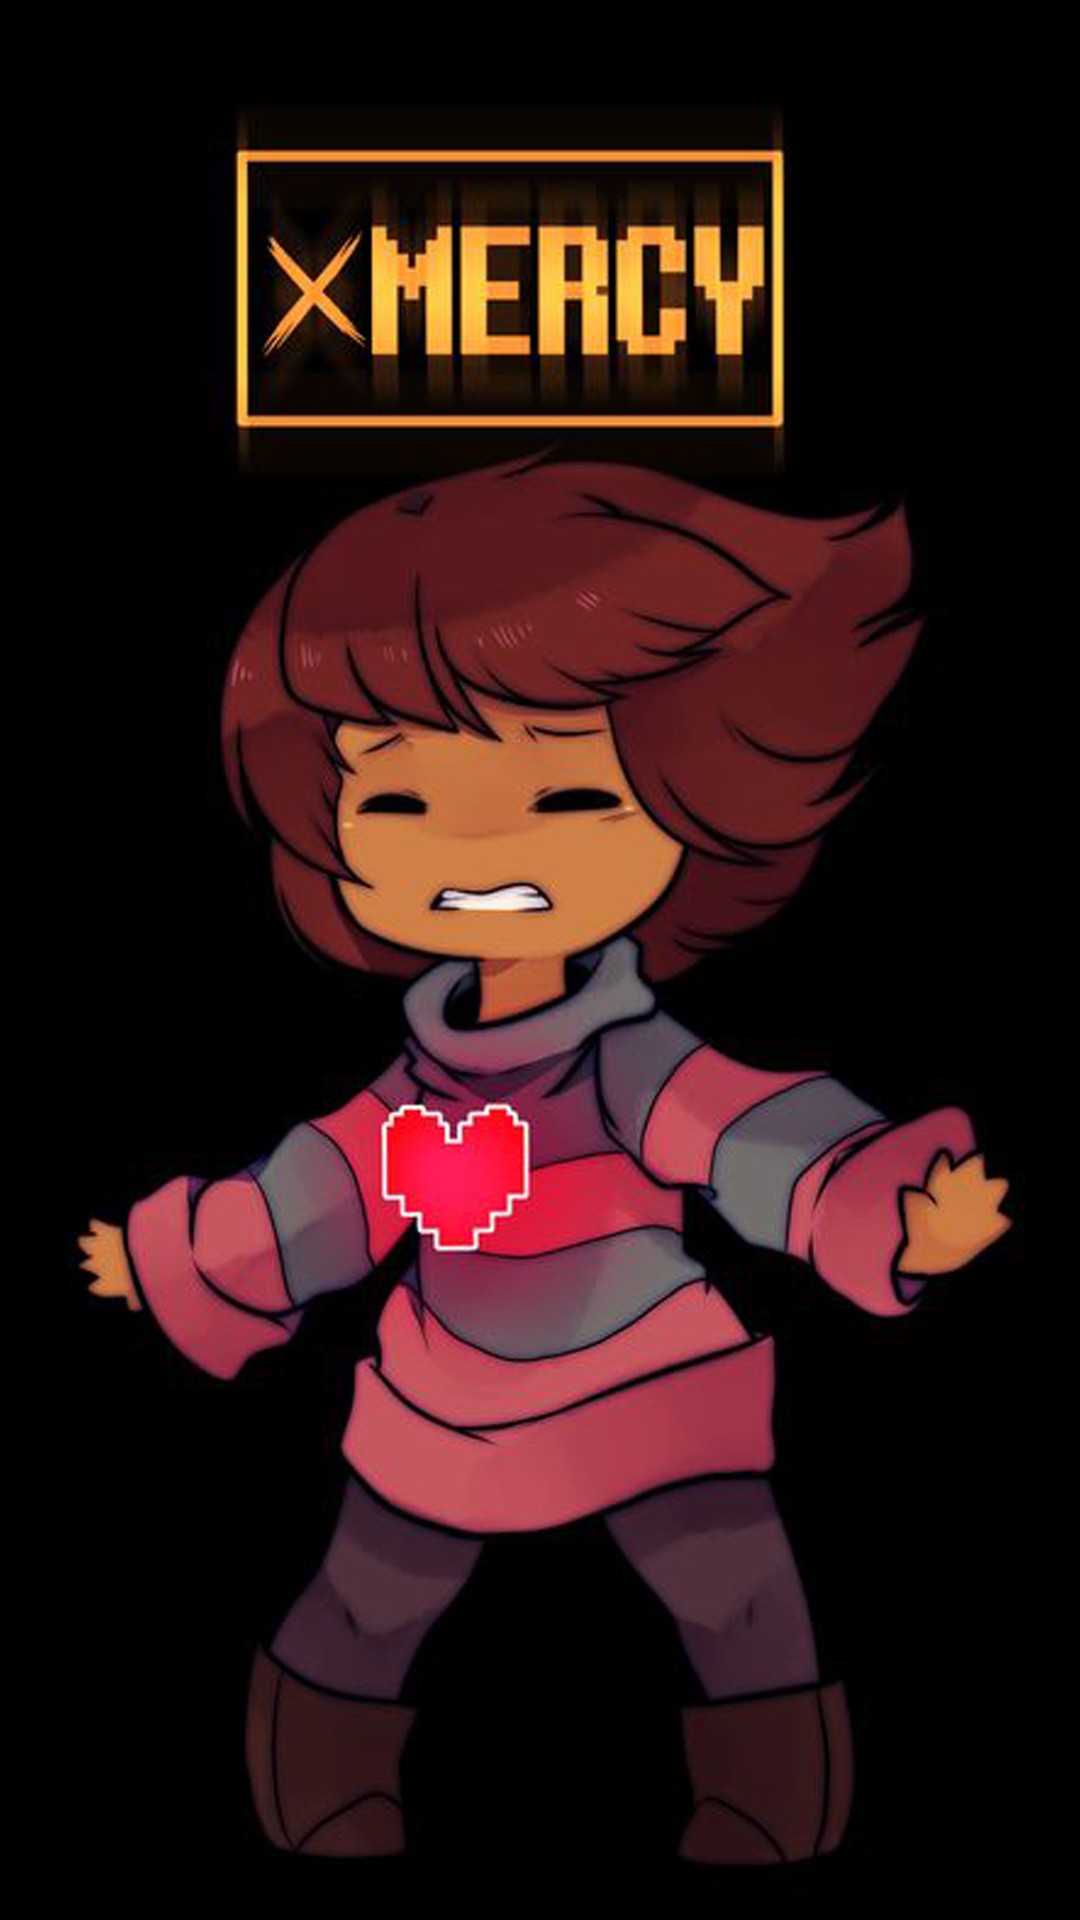 Undertale phone wallpaper ·① Download free backgrounds for 